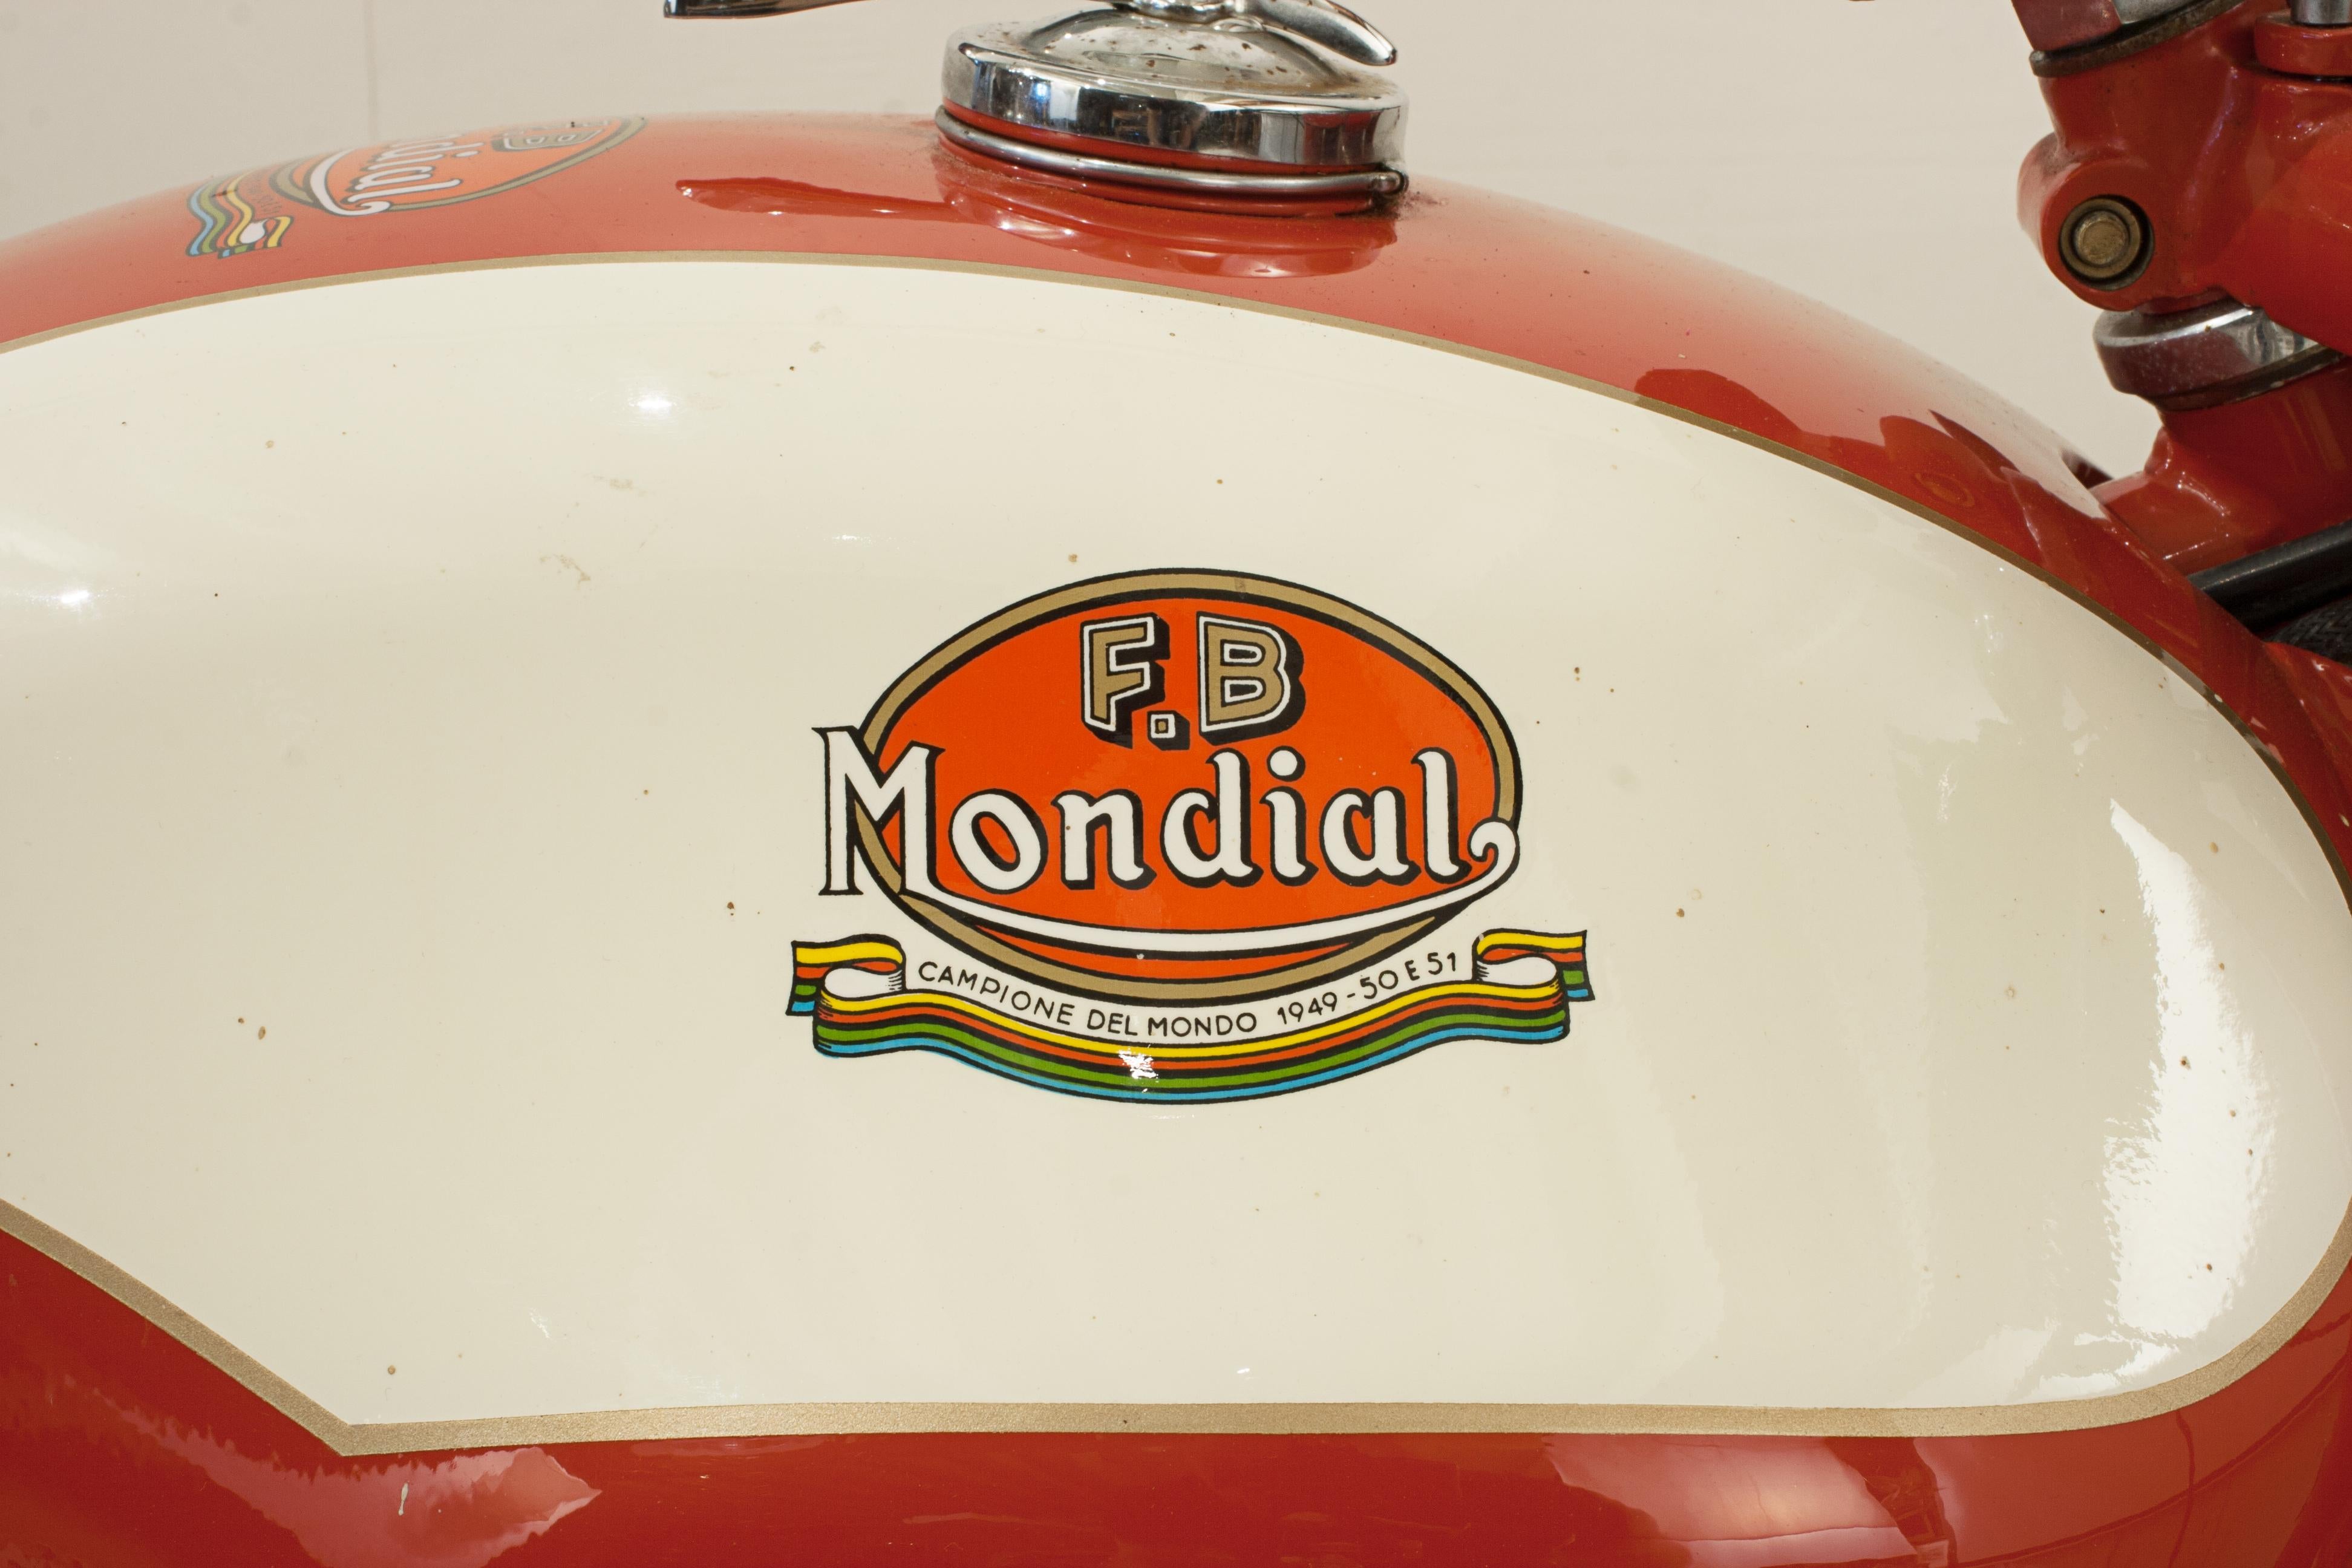 italian motorcycles for sale